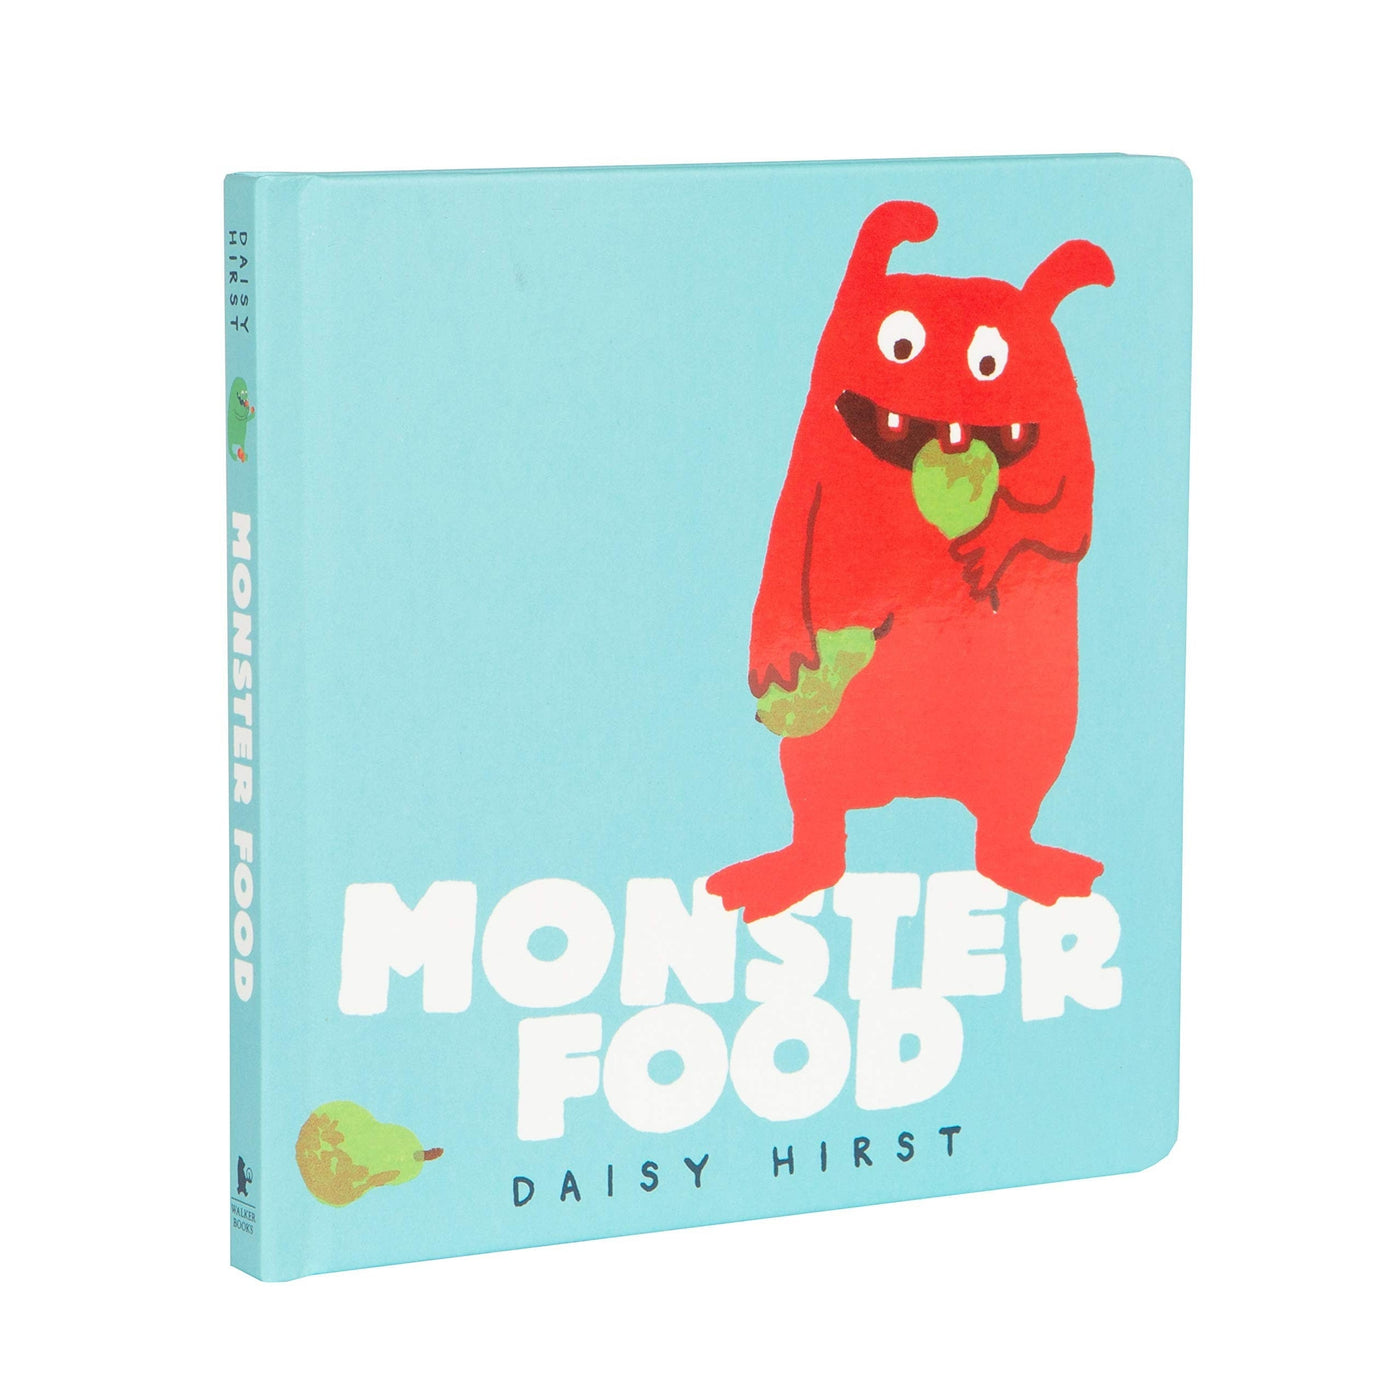 Monster Food - Daisy Hirst